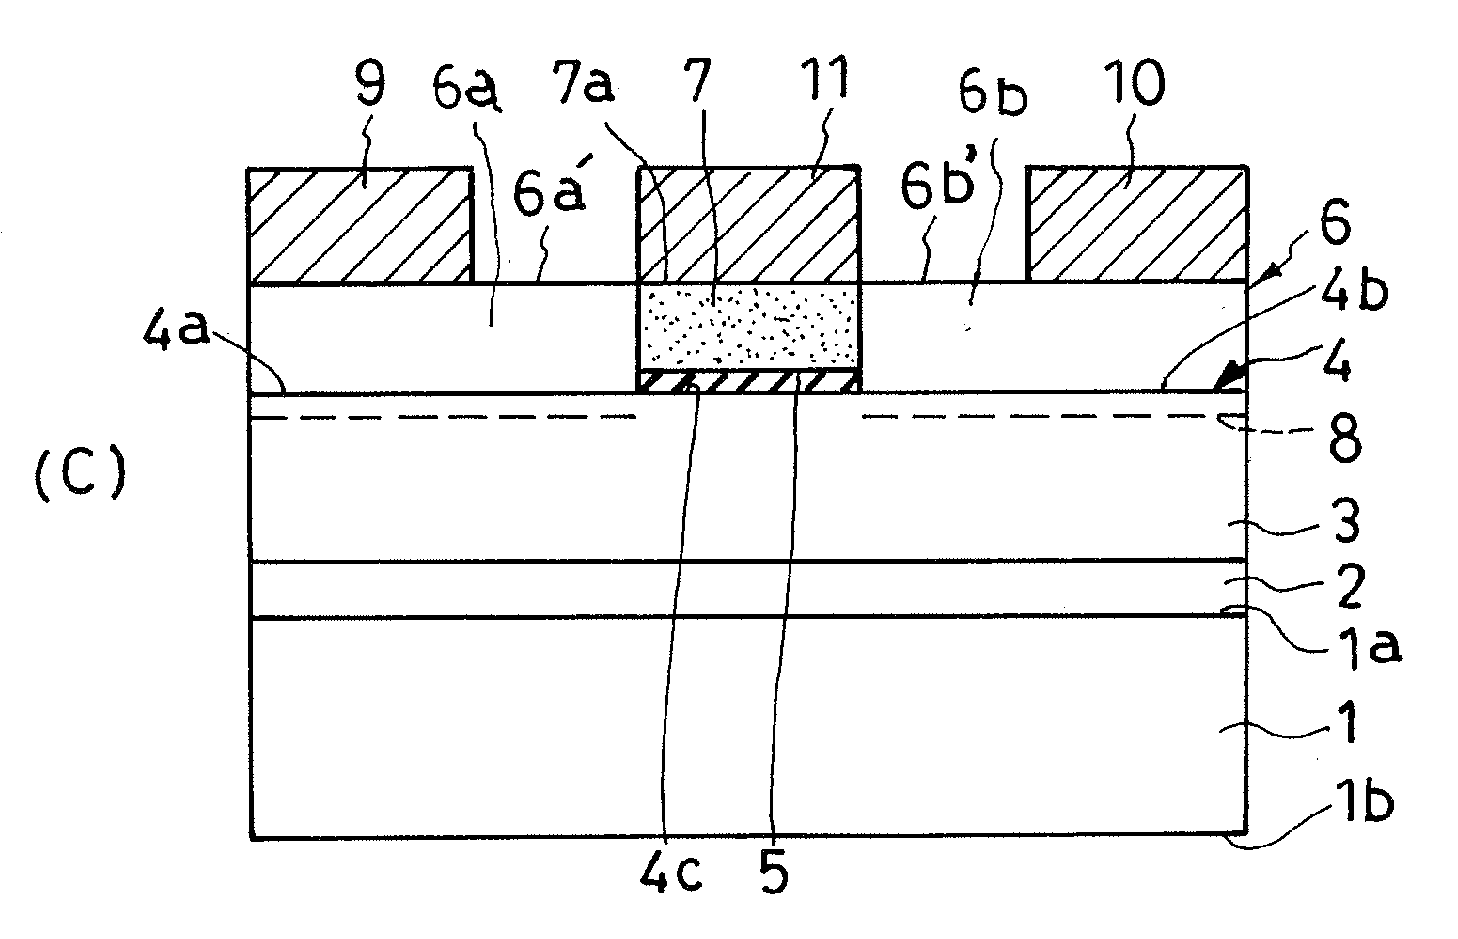 Field-effect semiconductor device and method of fabrication